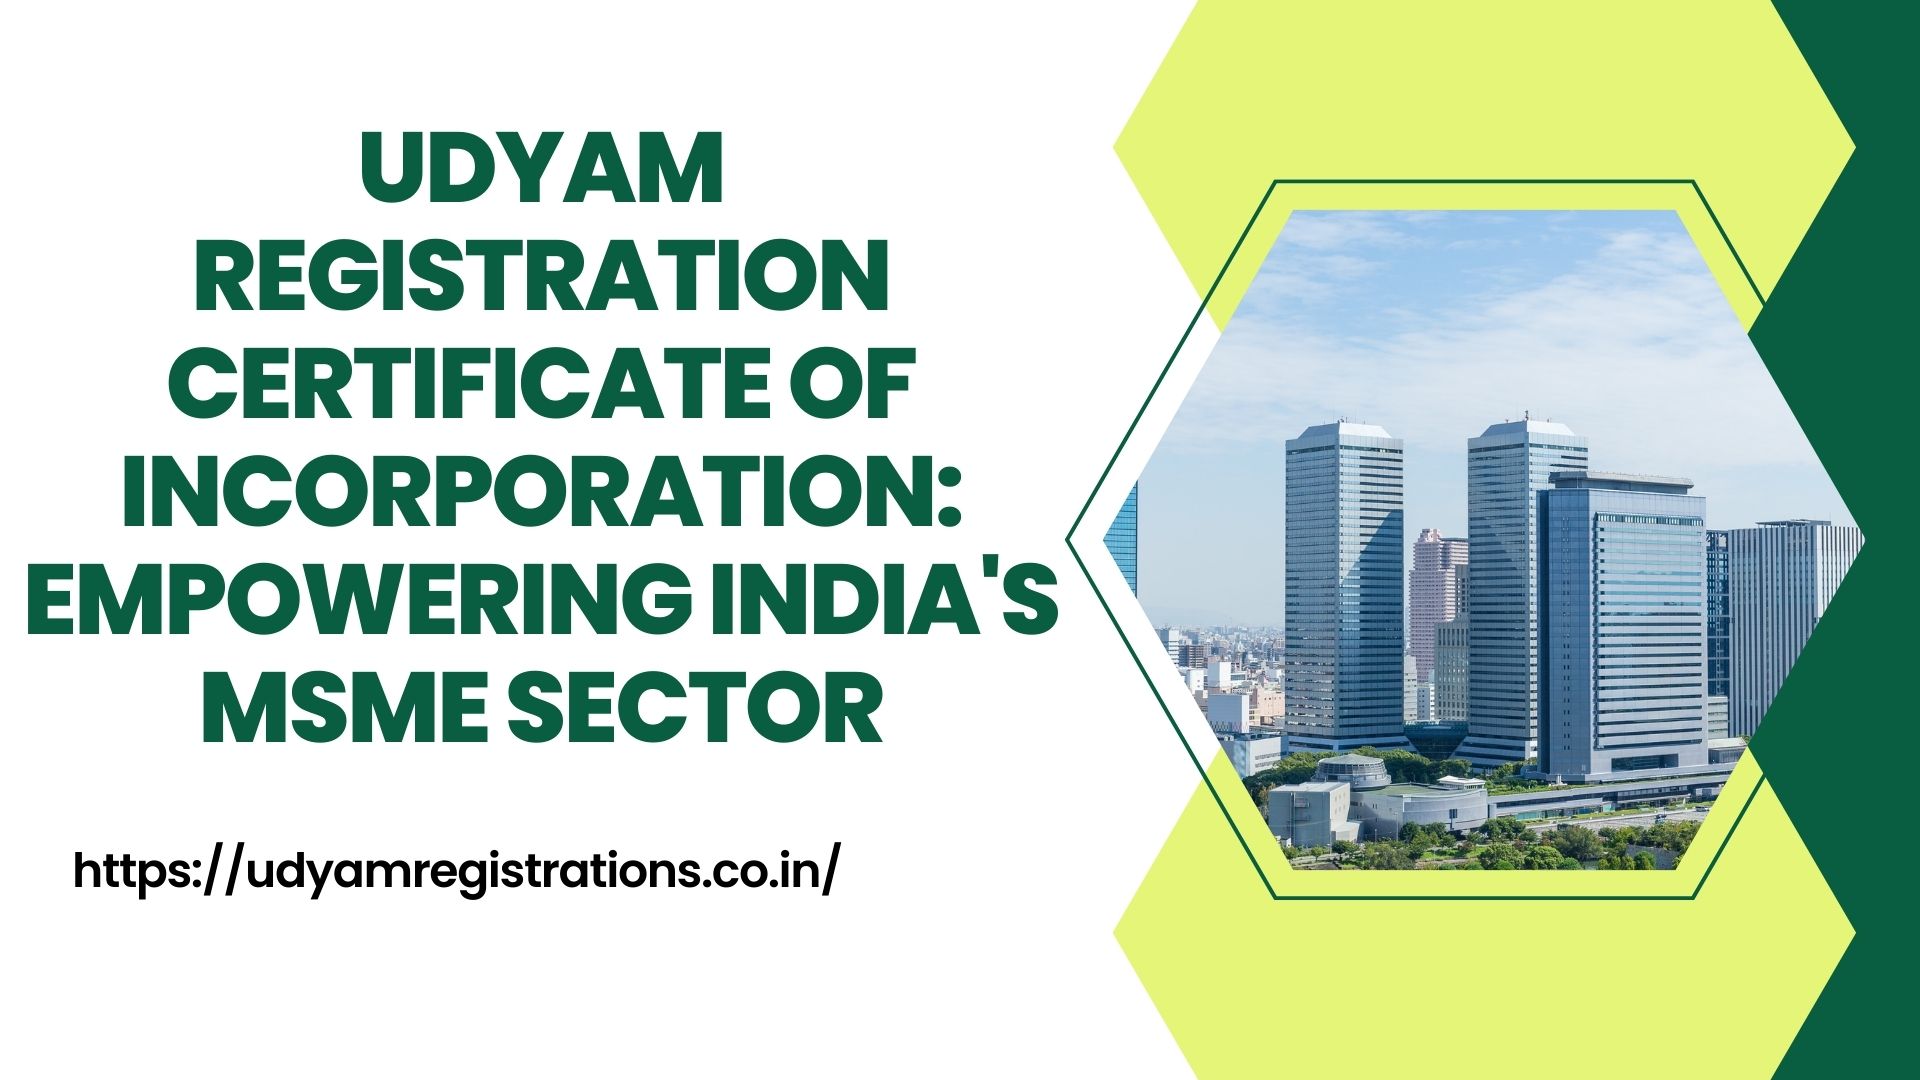 Udyam Registration Certificate of Incorporation: Empowering India’s MSME Sector